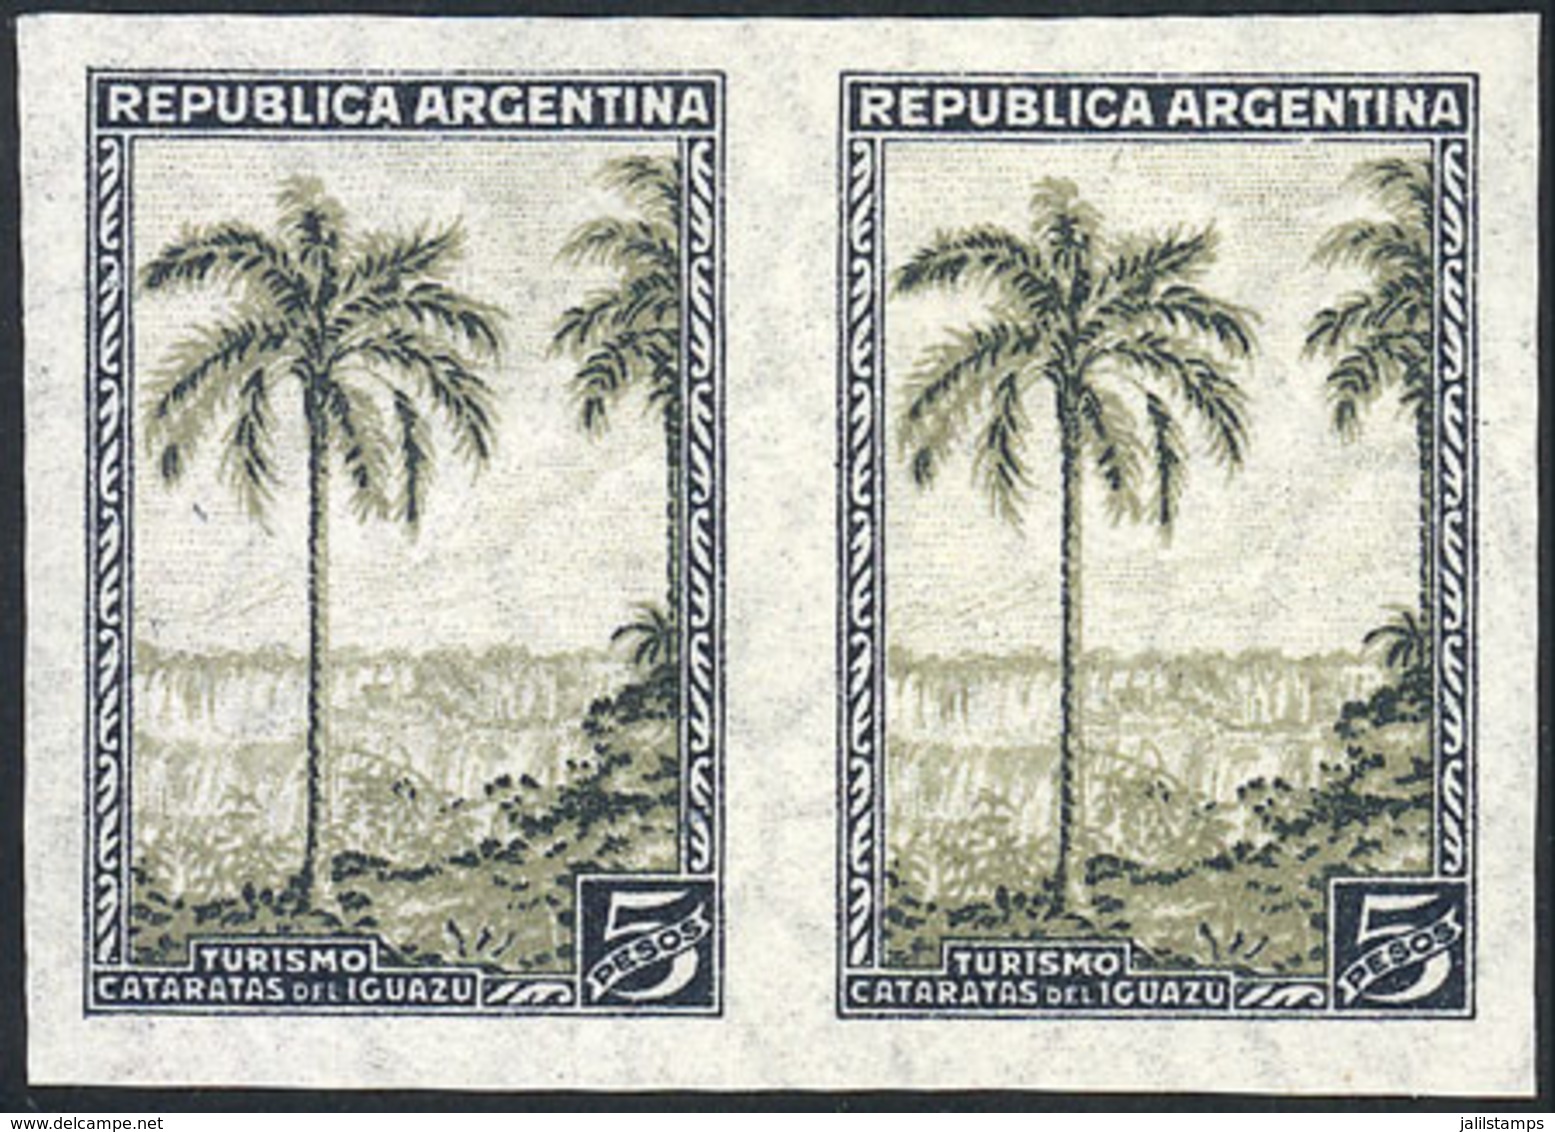 ARGENTINA: GJ.793P, 5P. Iguazú Falls, Watermark Sun With Straight Rays, IMPERFORATE PAIR, MNH (+30%), Excellent Quality! - Storia Postale